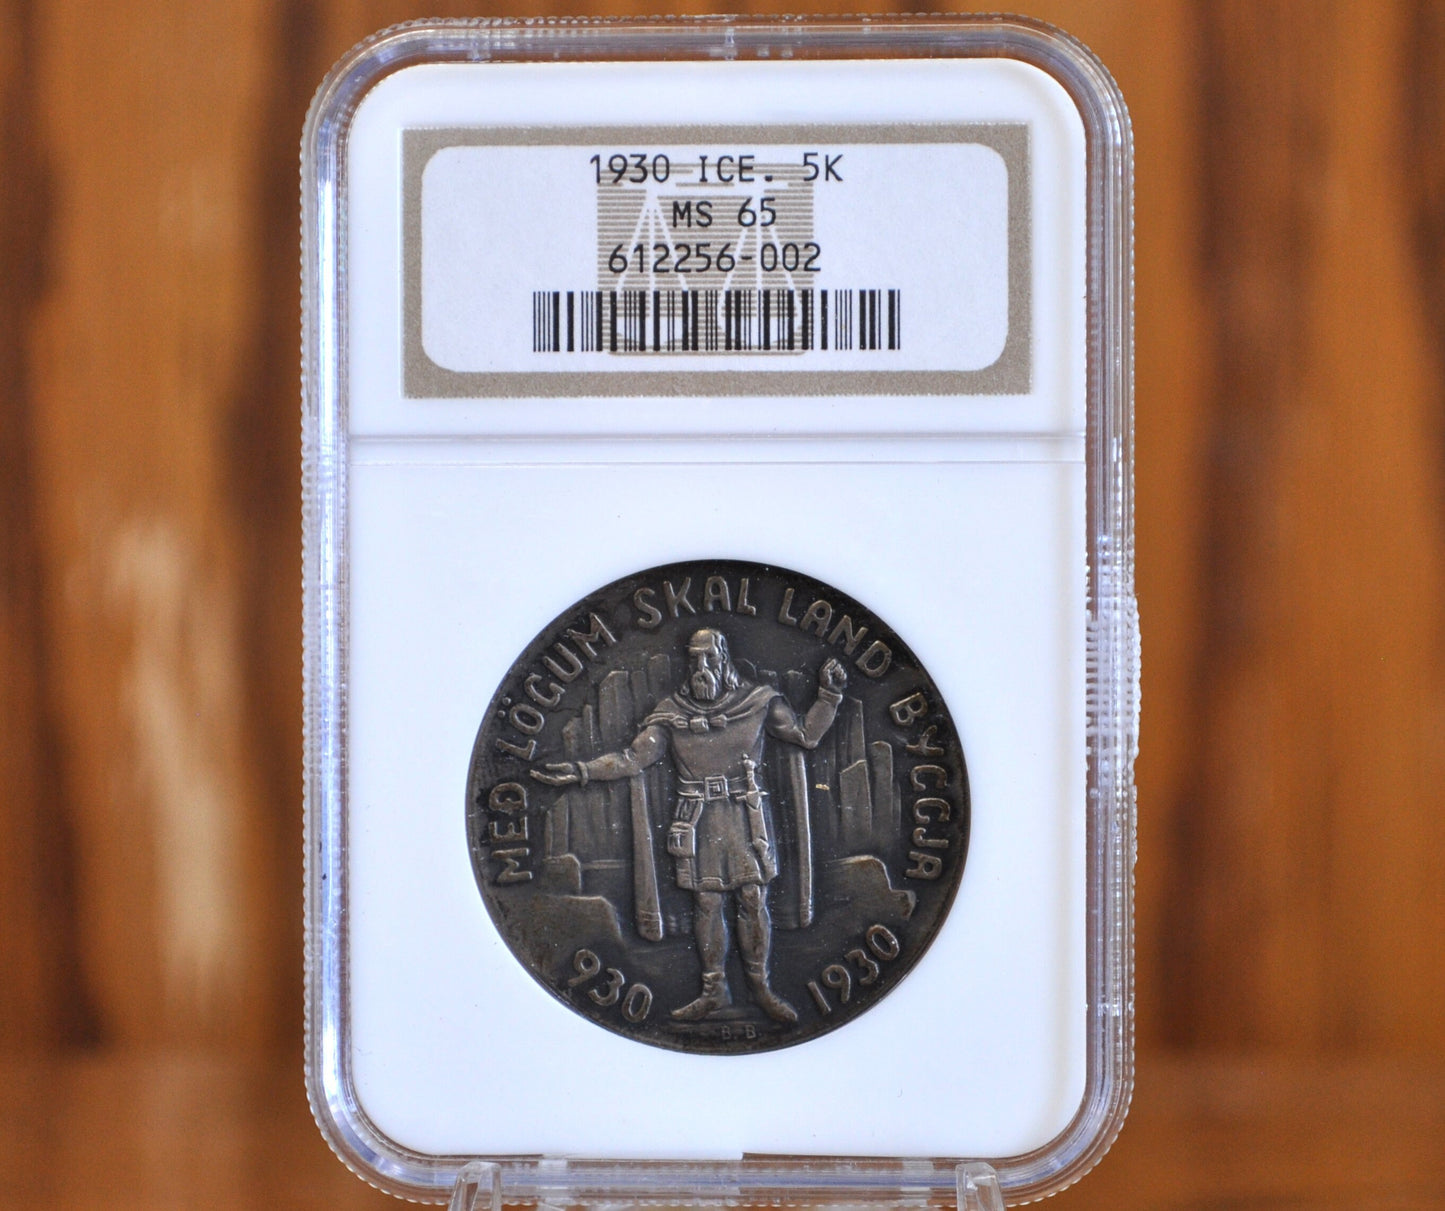 1930 Iceland 5K, NGC MS65, 1000th Anniversary Althing - Stunning Coin; Only 20,000 Made, Very Rare - Iceland 5 Kronur 1930 Althing Mil